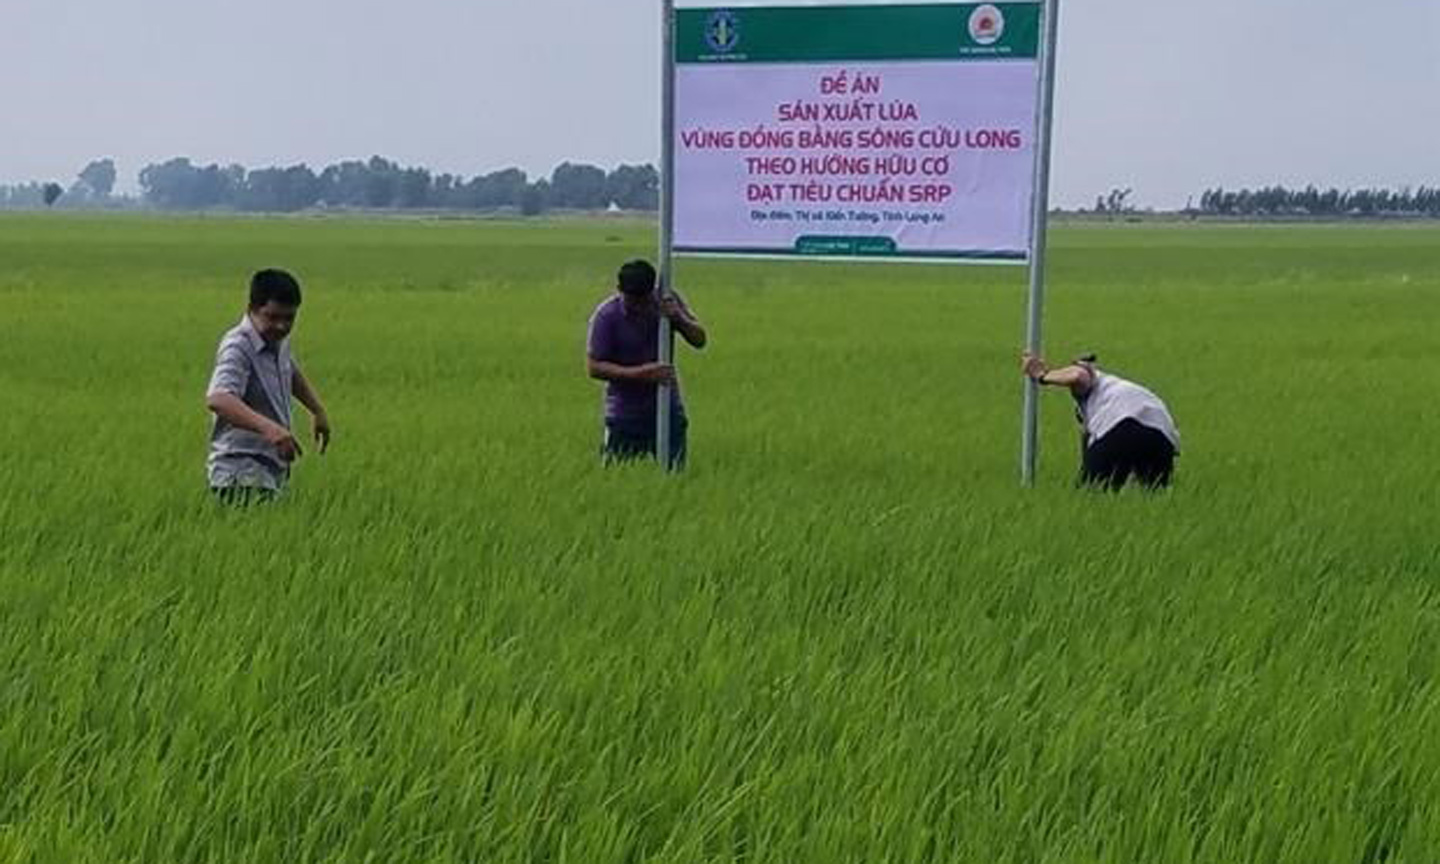 A field of rice grown using organic fertiliser in the southern province of Long An. (Photo: VNA)